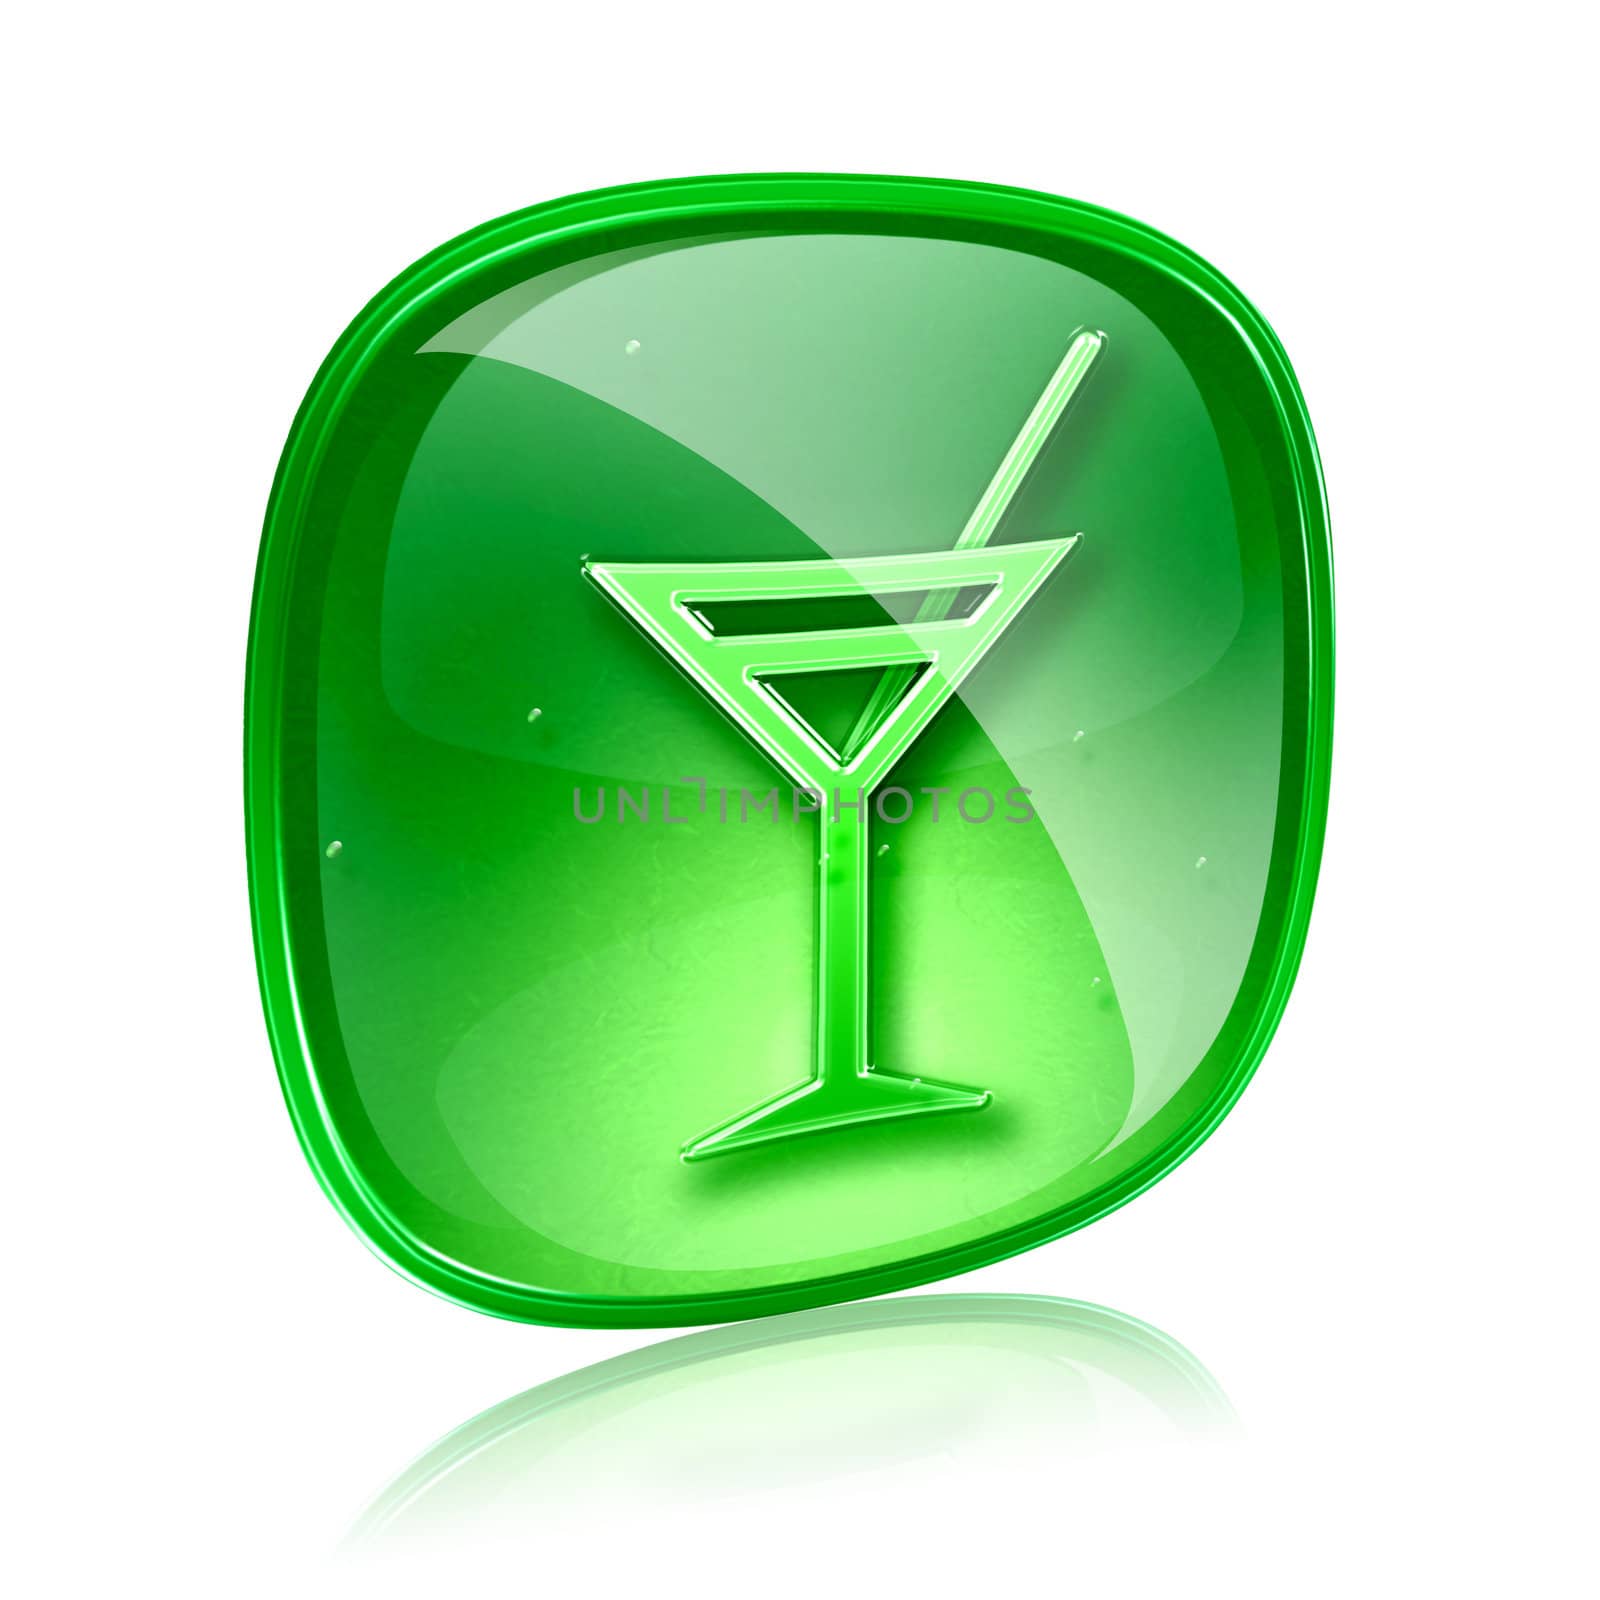 wine-glass icon green glass, isolated on white background.